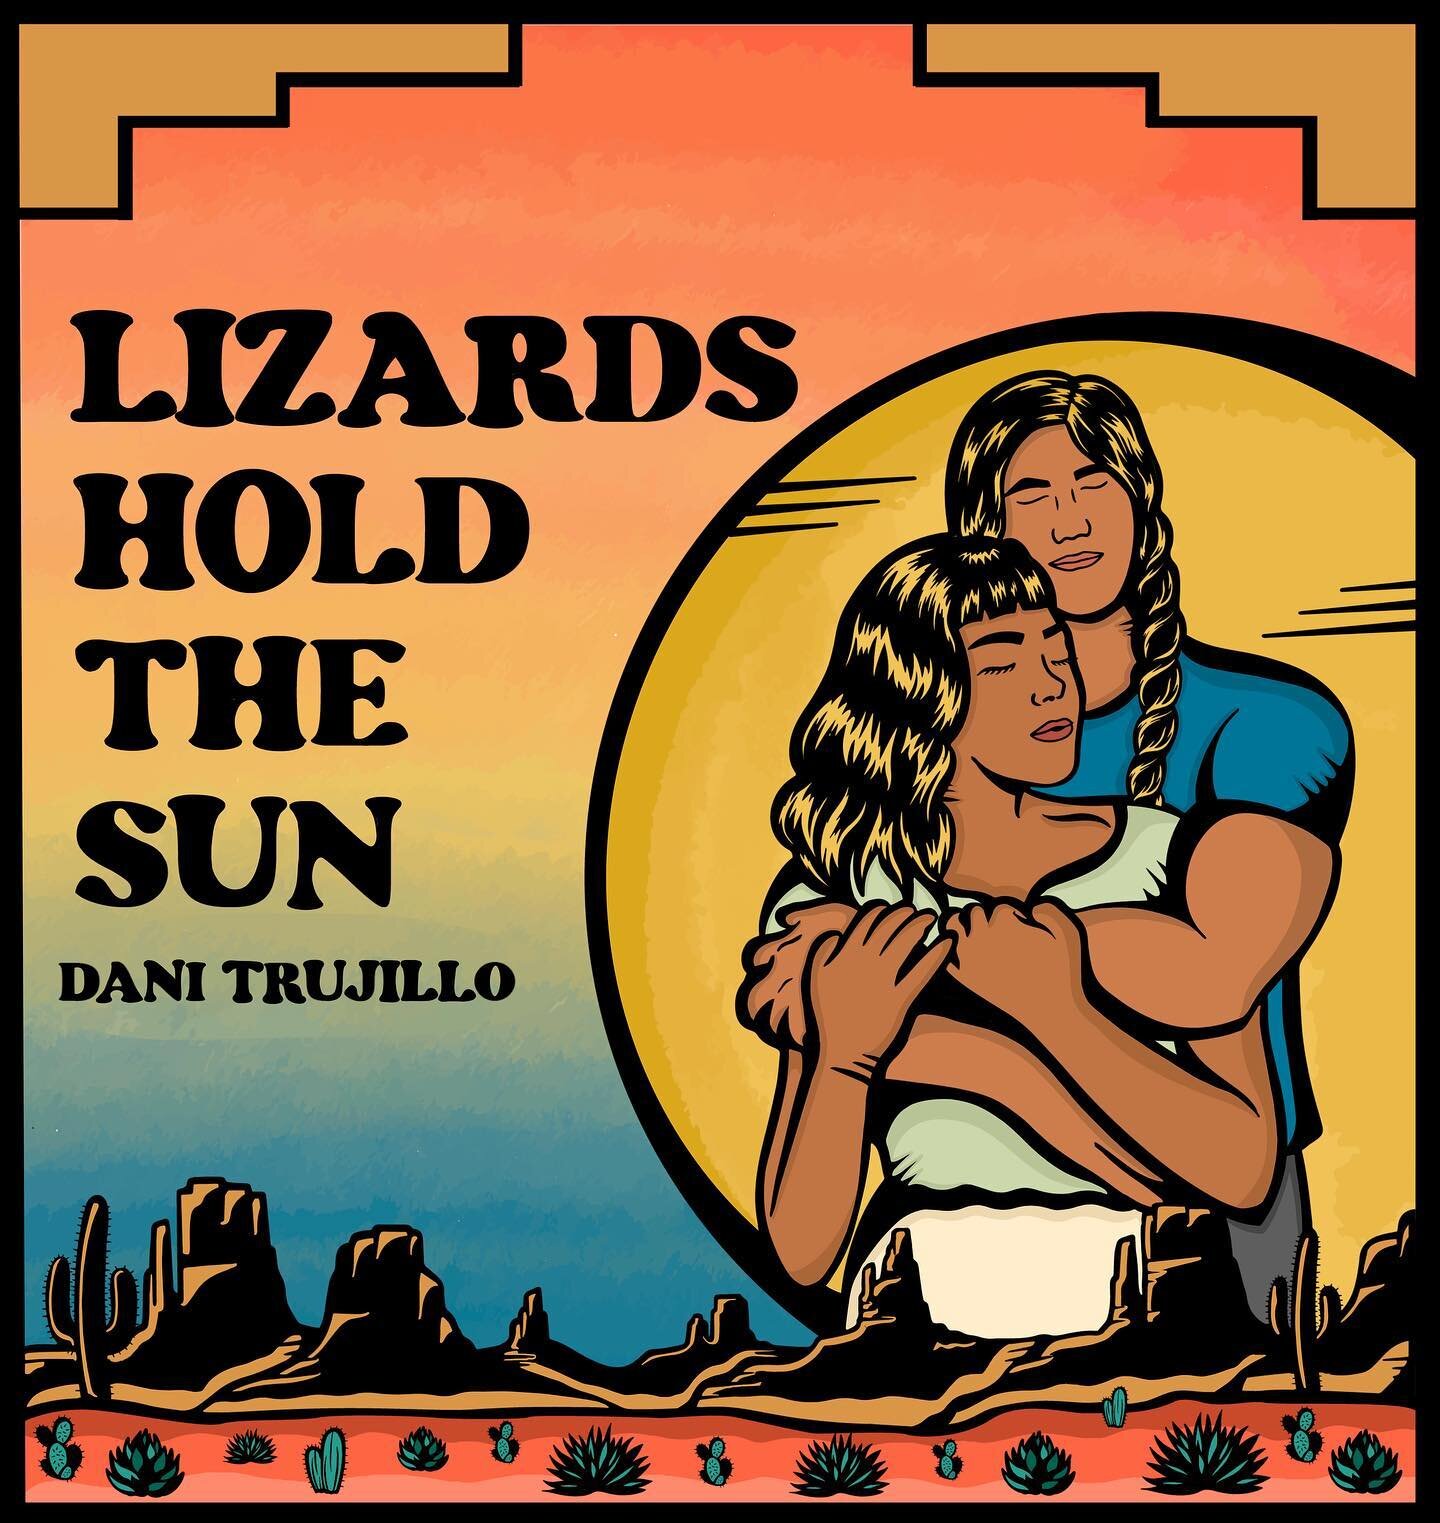 This has been such a fun book cover illustration project in collaboration with @dh.trujillo for her new novel LIZARDS HOLD THE SUN 🦎☀️🧡 (e-book Pre-Order available!!) 📚
&bull; &bull; &bull; &bull;
Art Description:
This artwork captures the details